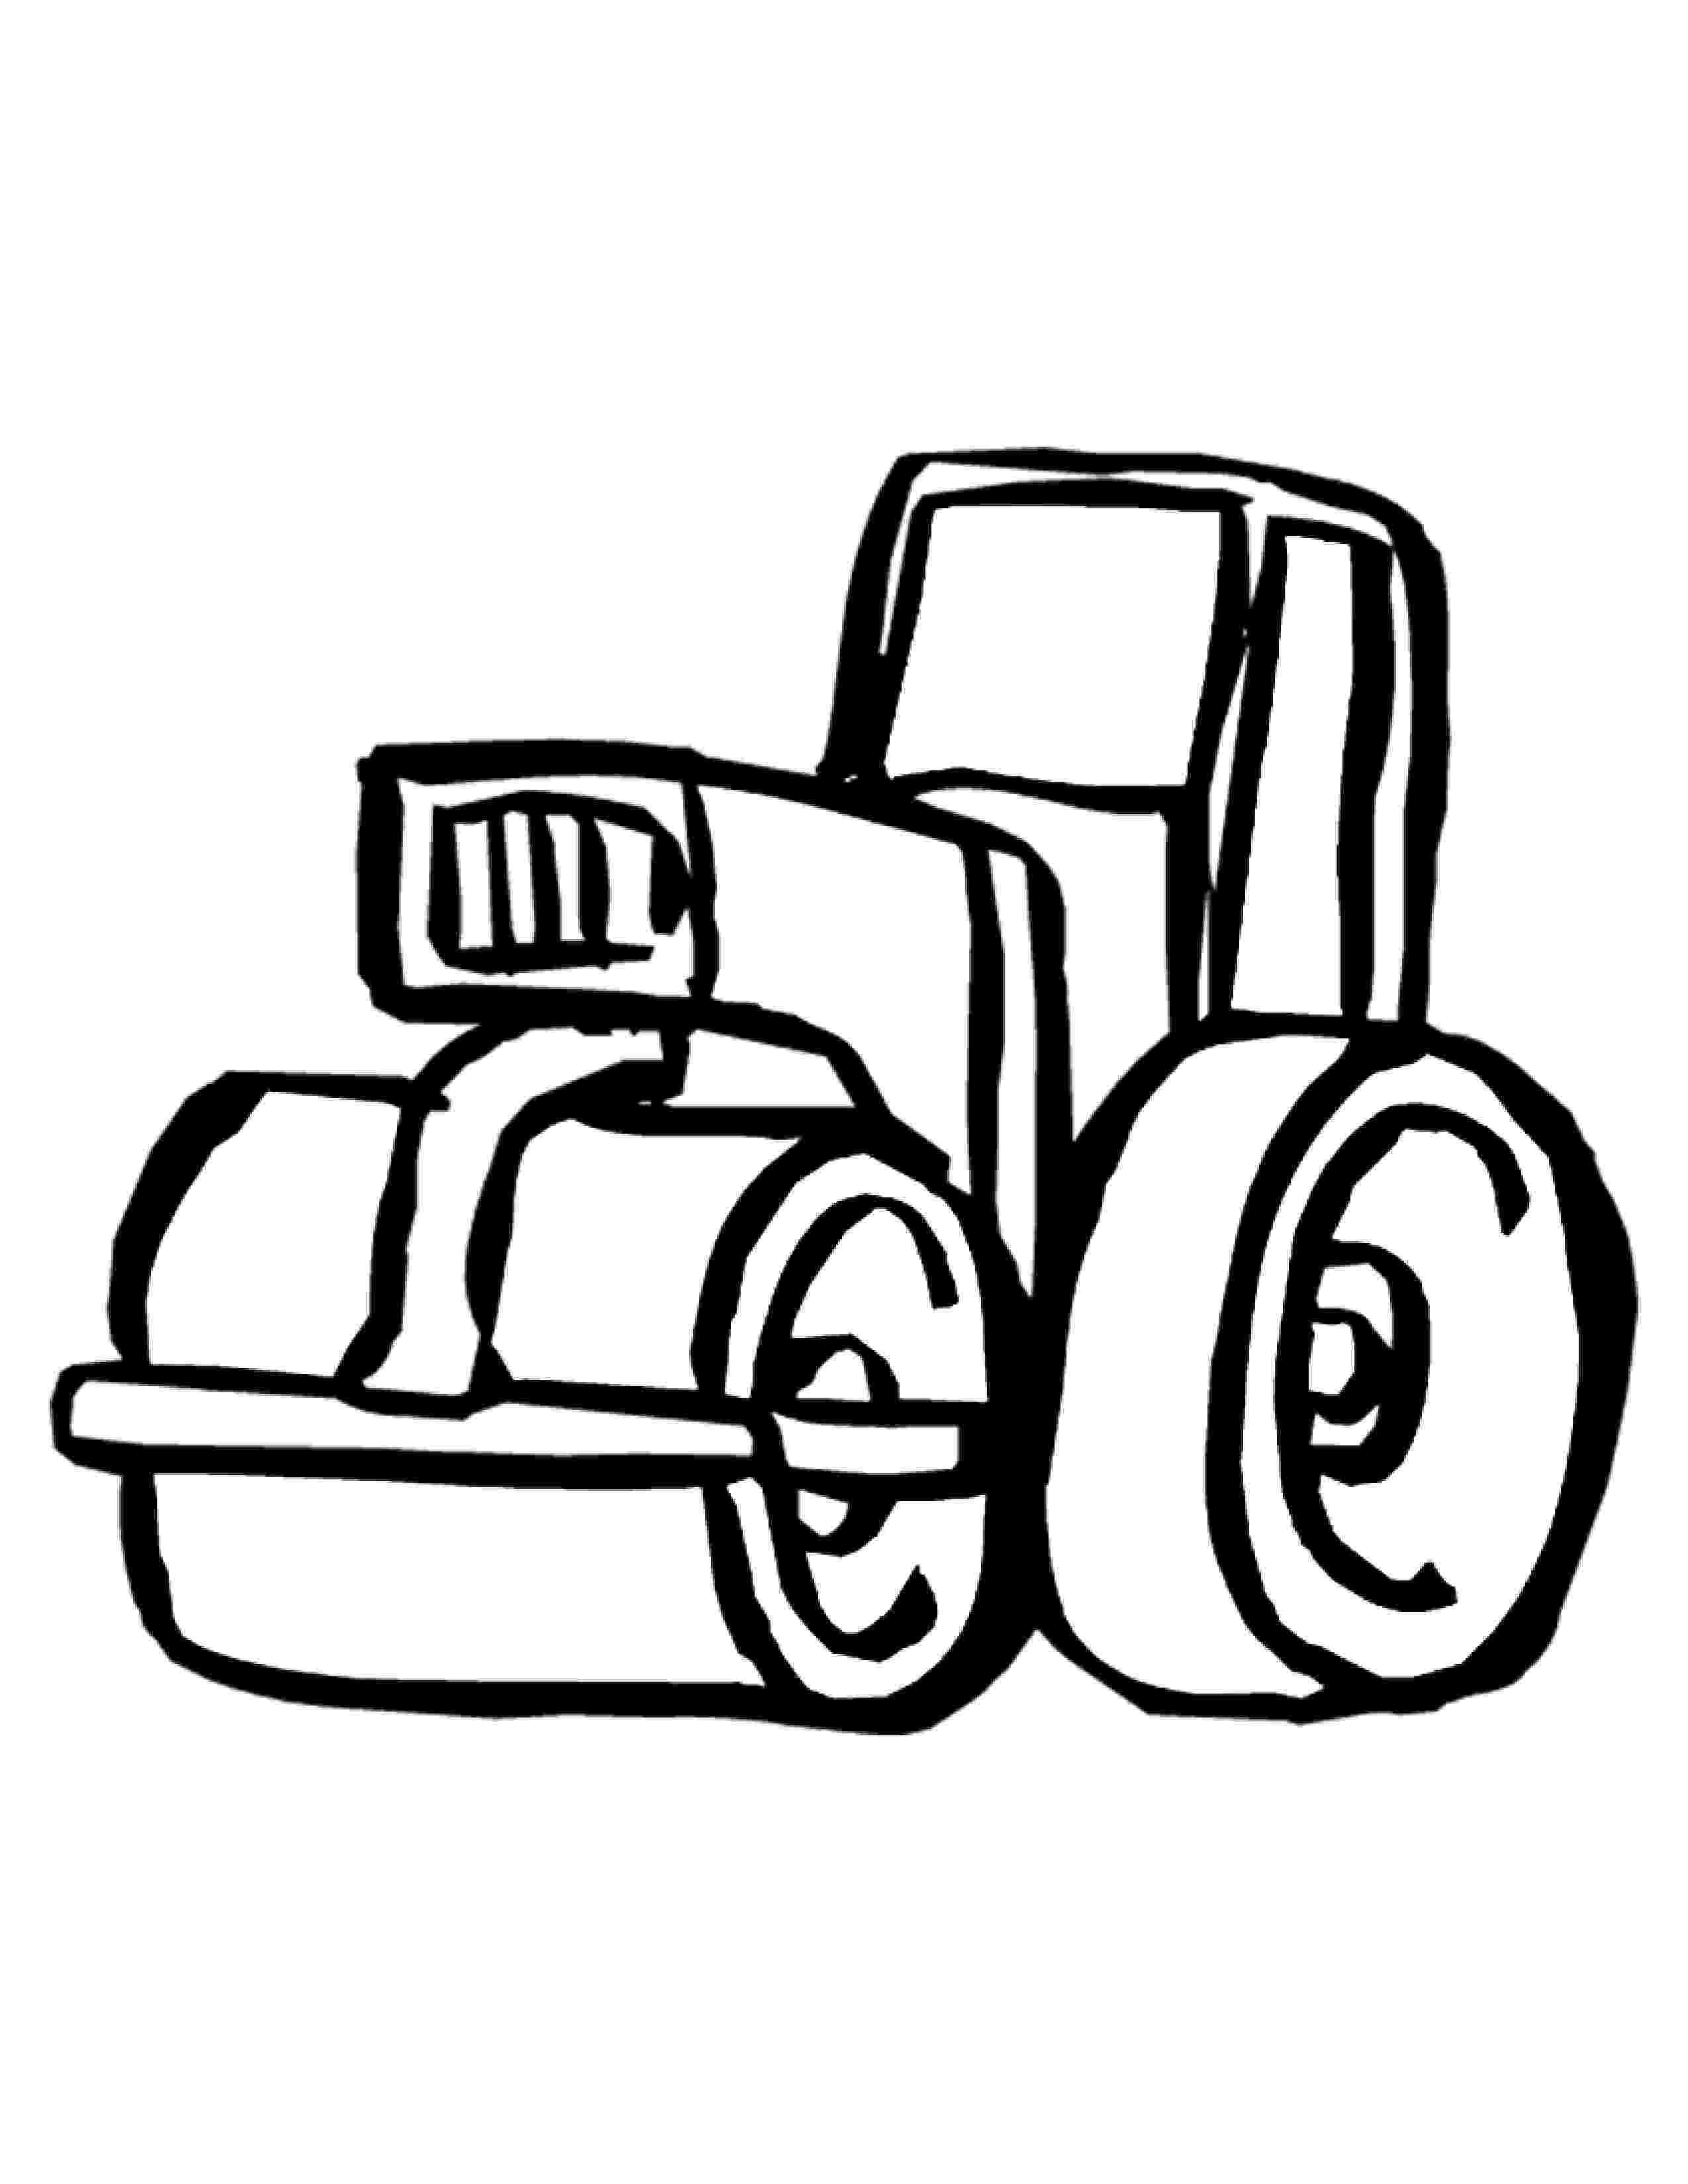 construction trucks coloring pages 40 free printable truck coloring pages download trucks pages coloring construction 